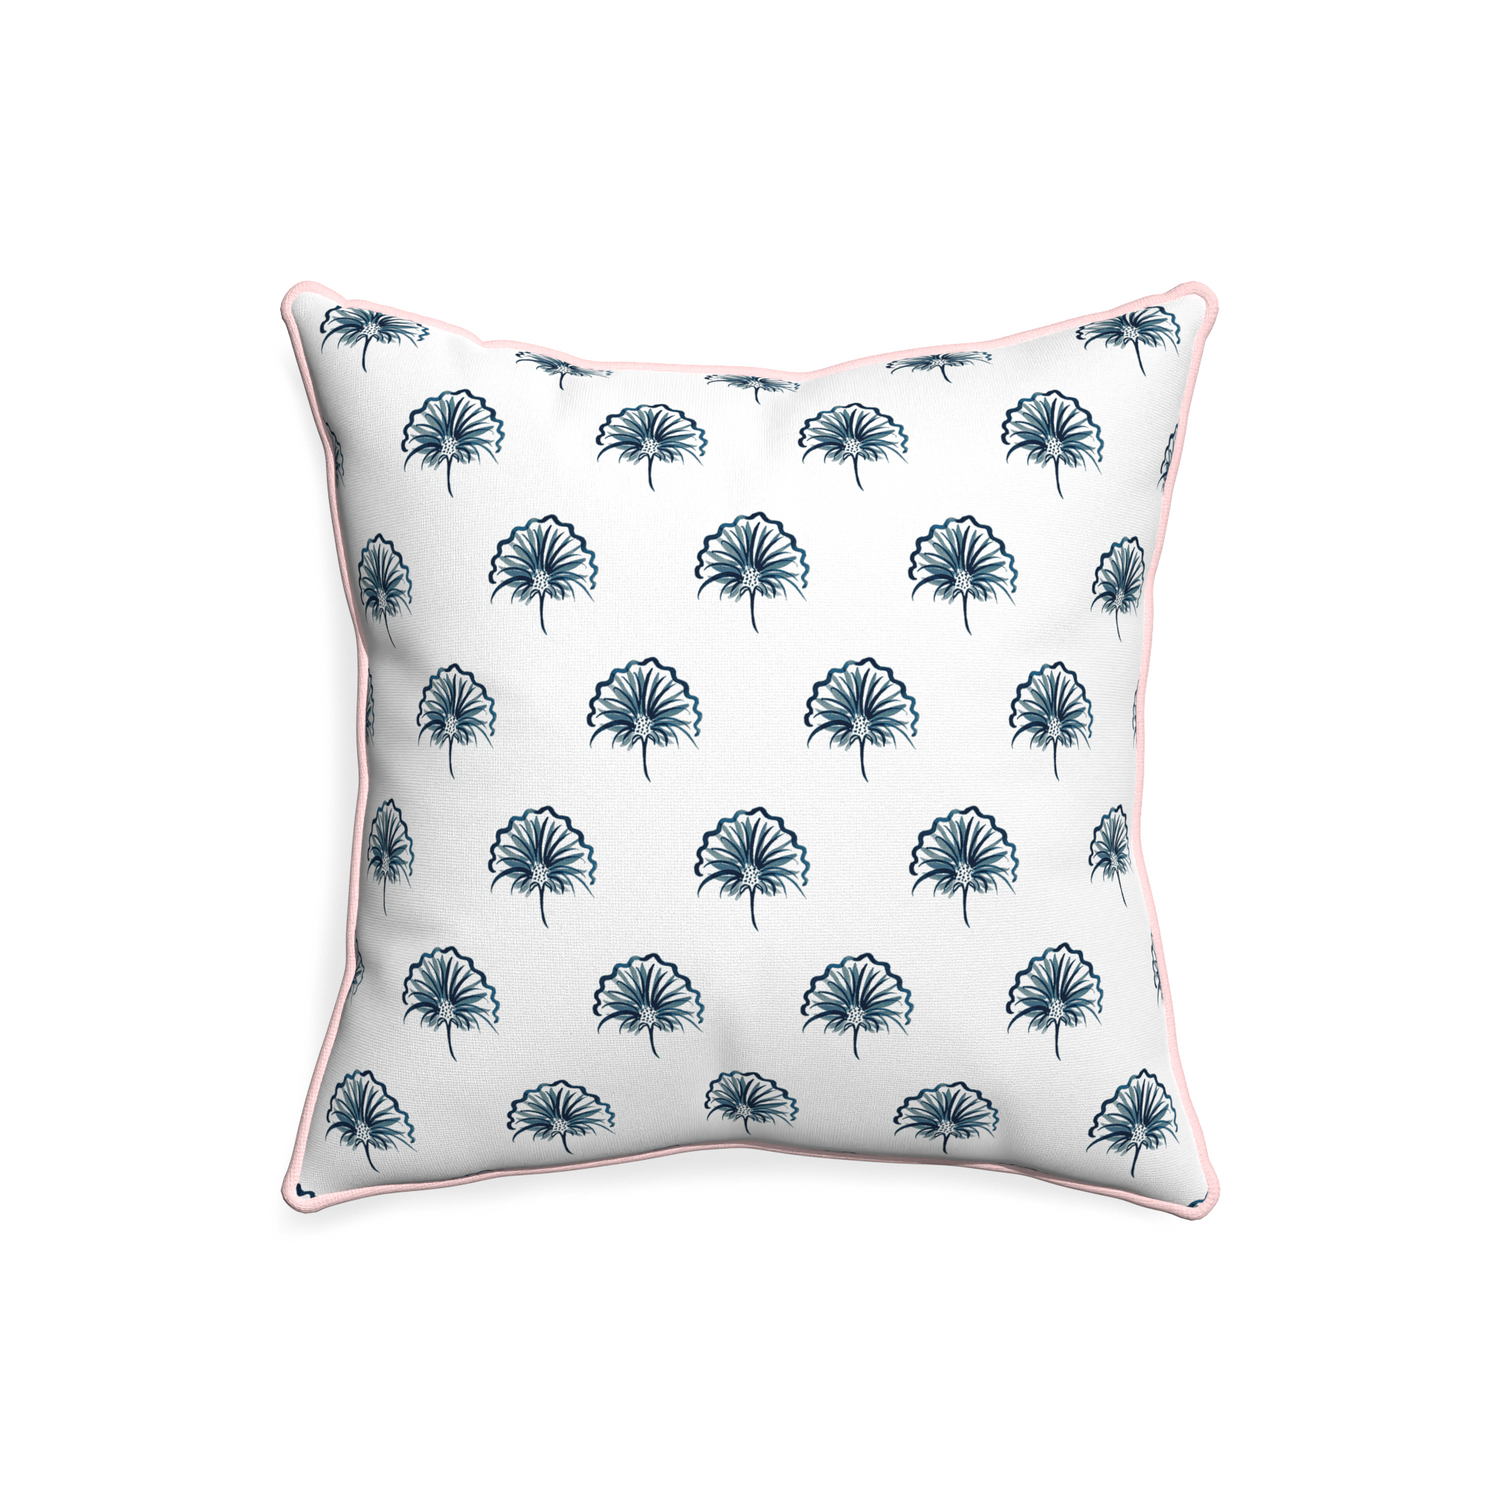 20-square penelope midnight custom floral navypillow with petal piping on white background